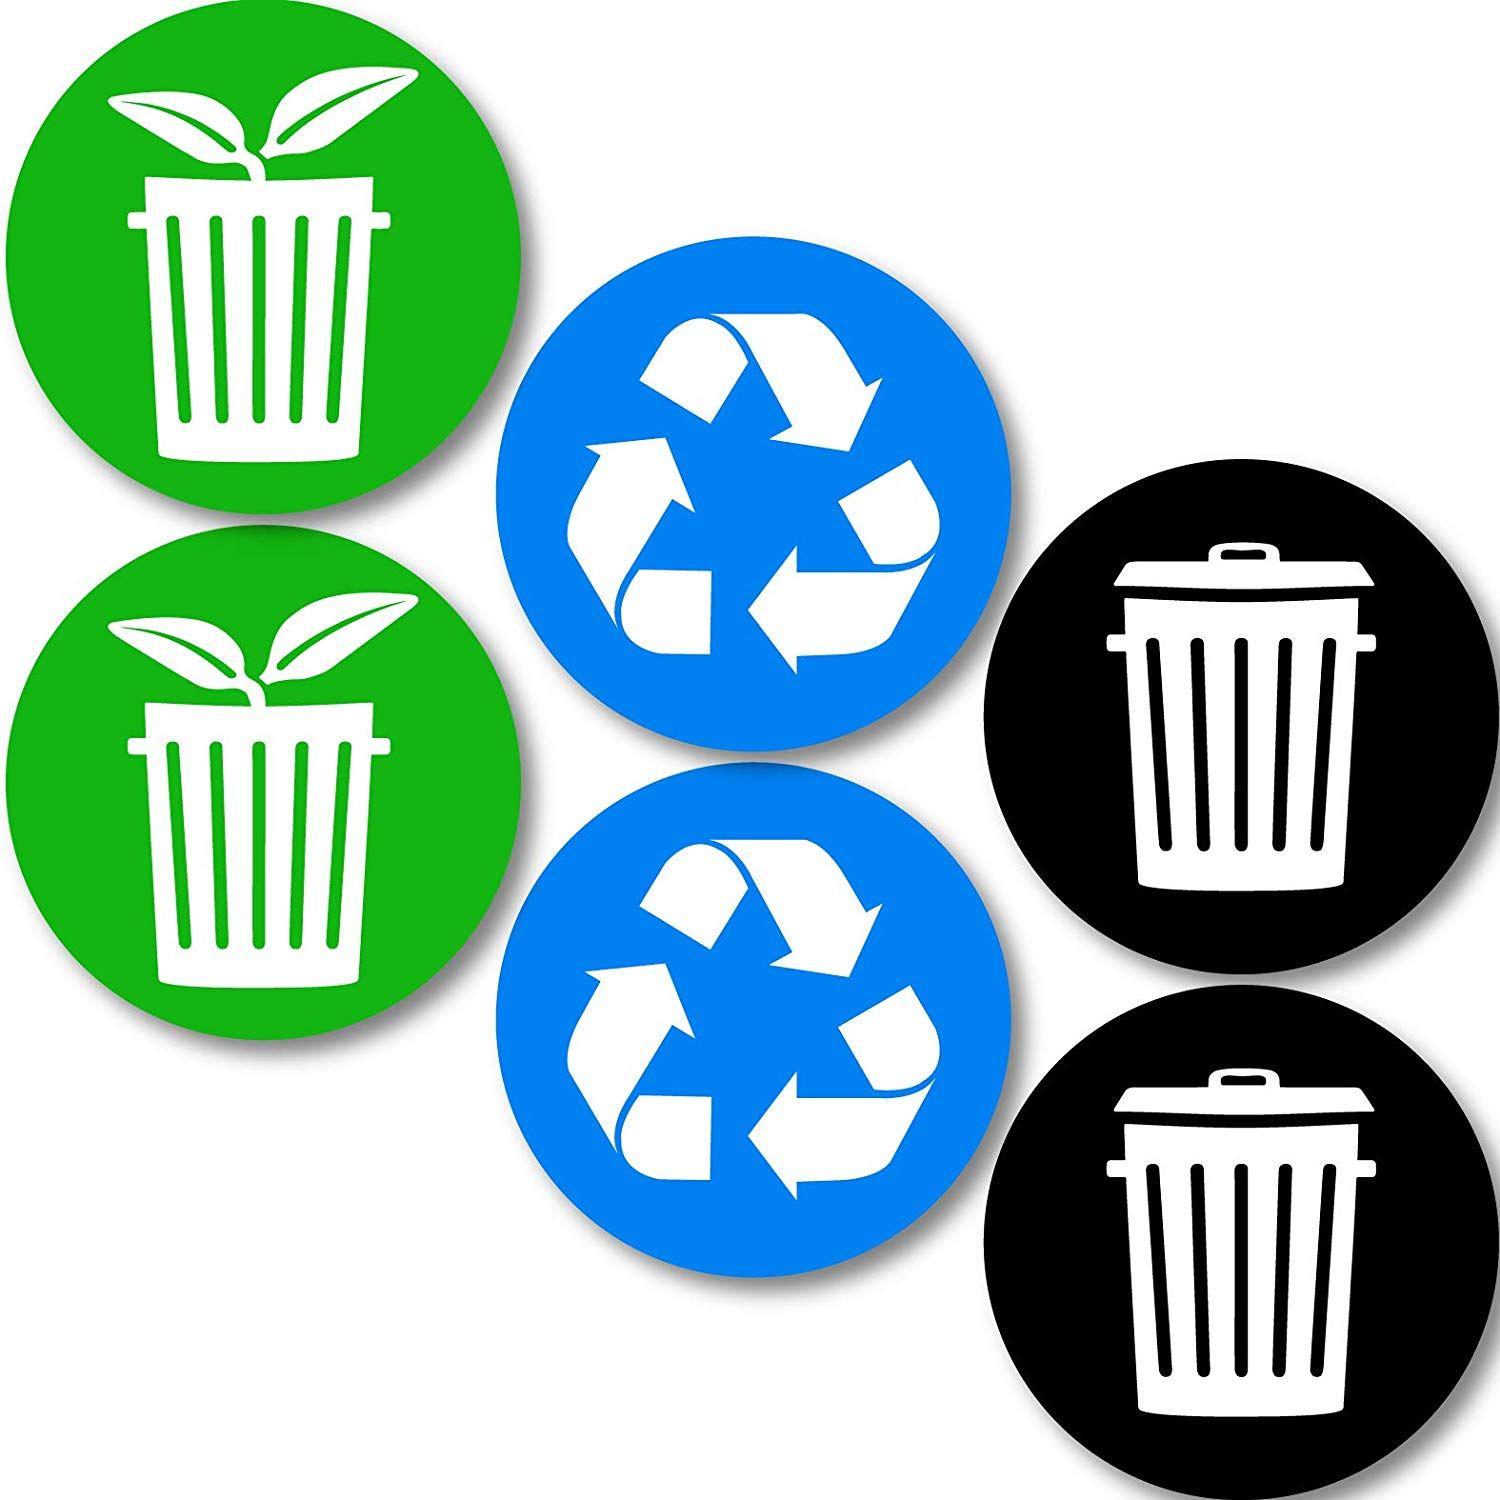 Compost Logo - Recycle Trash and Compost Logo Stickers (6 Pack) 4in x 4in - Organize Trash  - for Metal or Plastic Garbage cans, containers and Bins - Indoor & ...